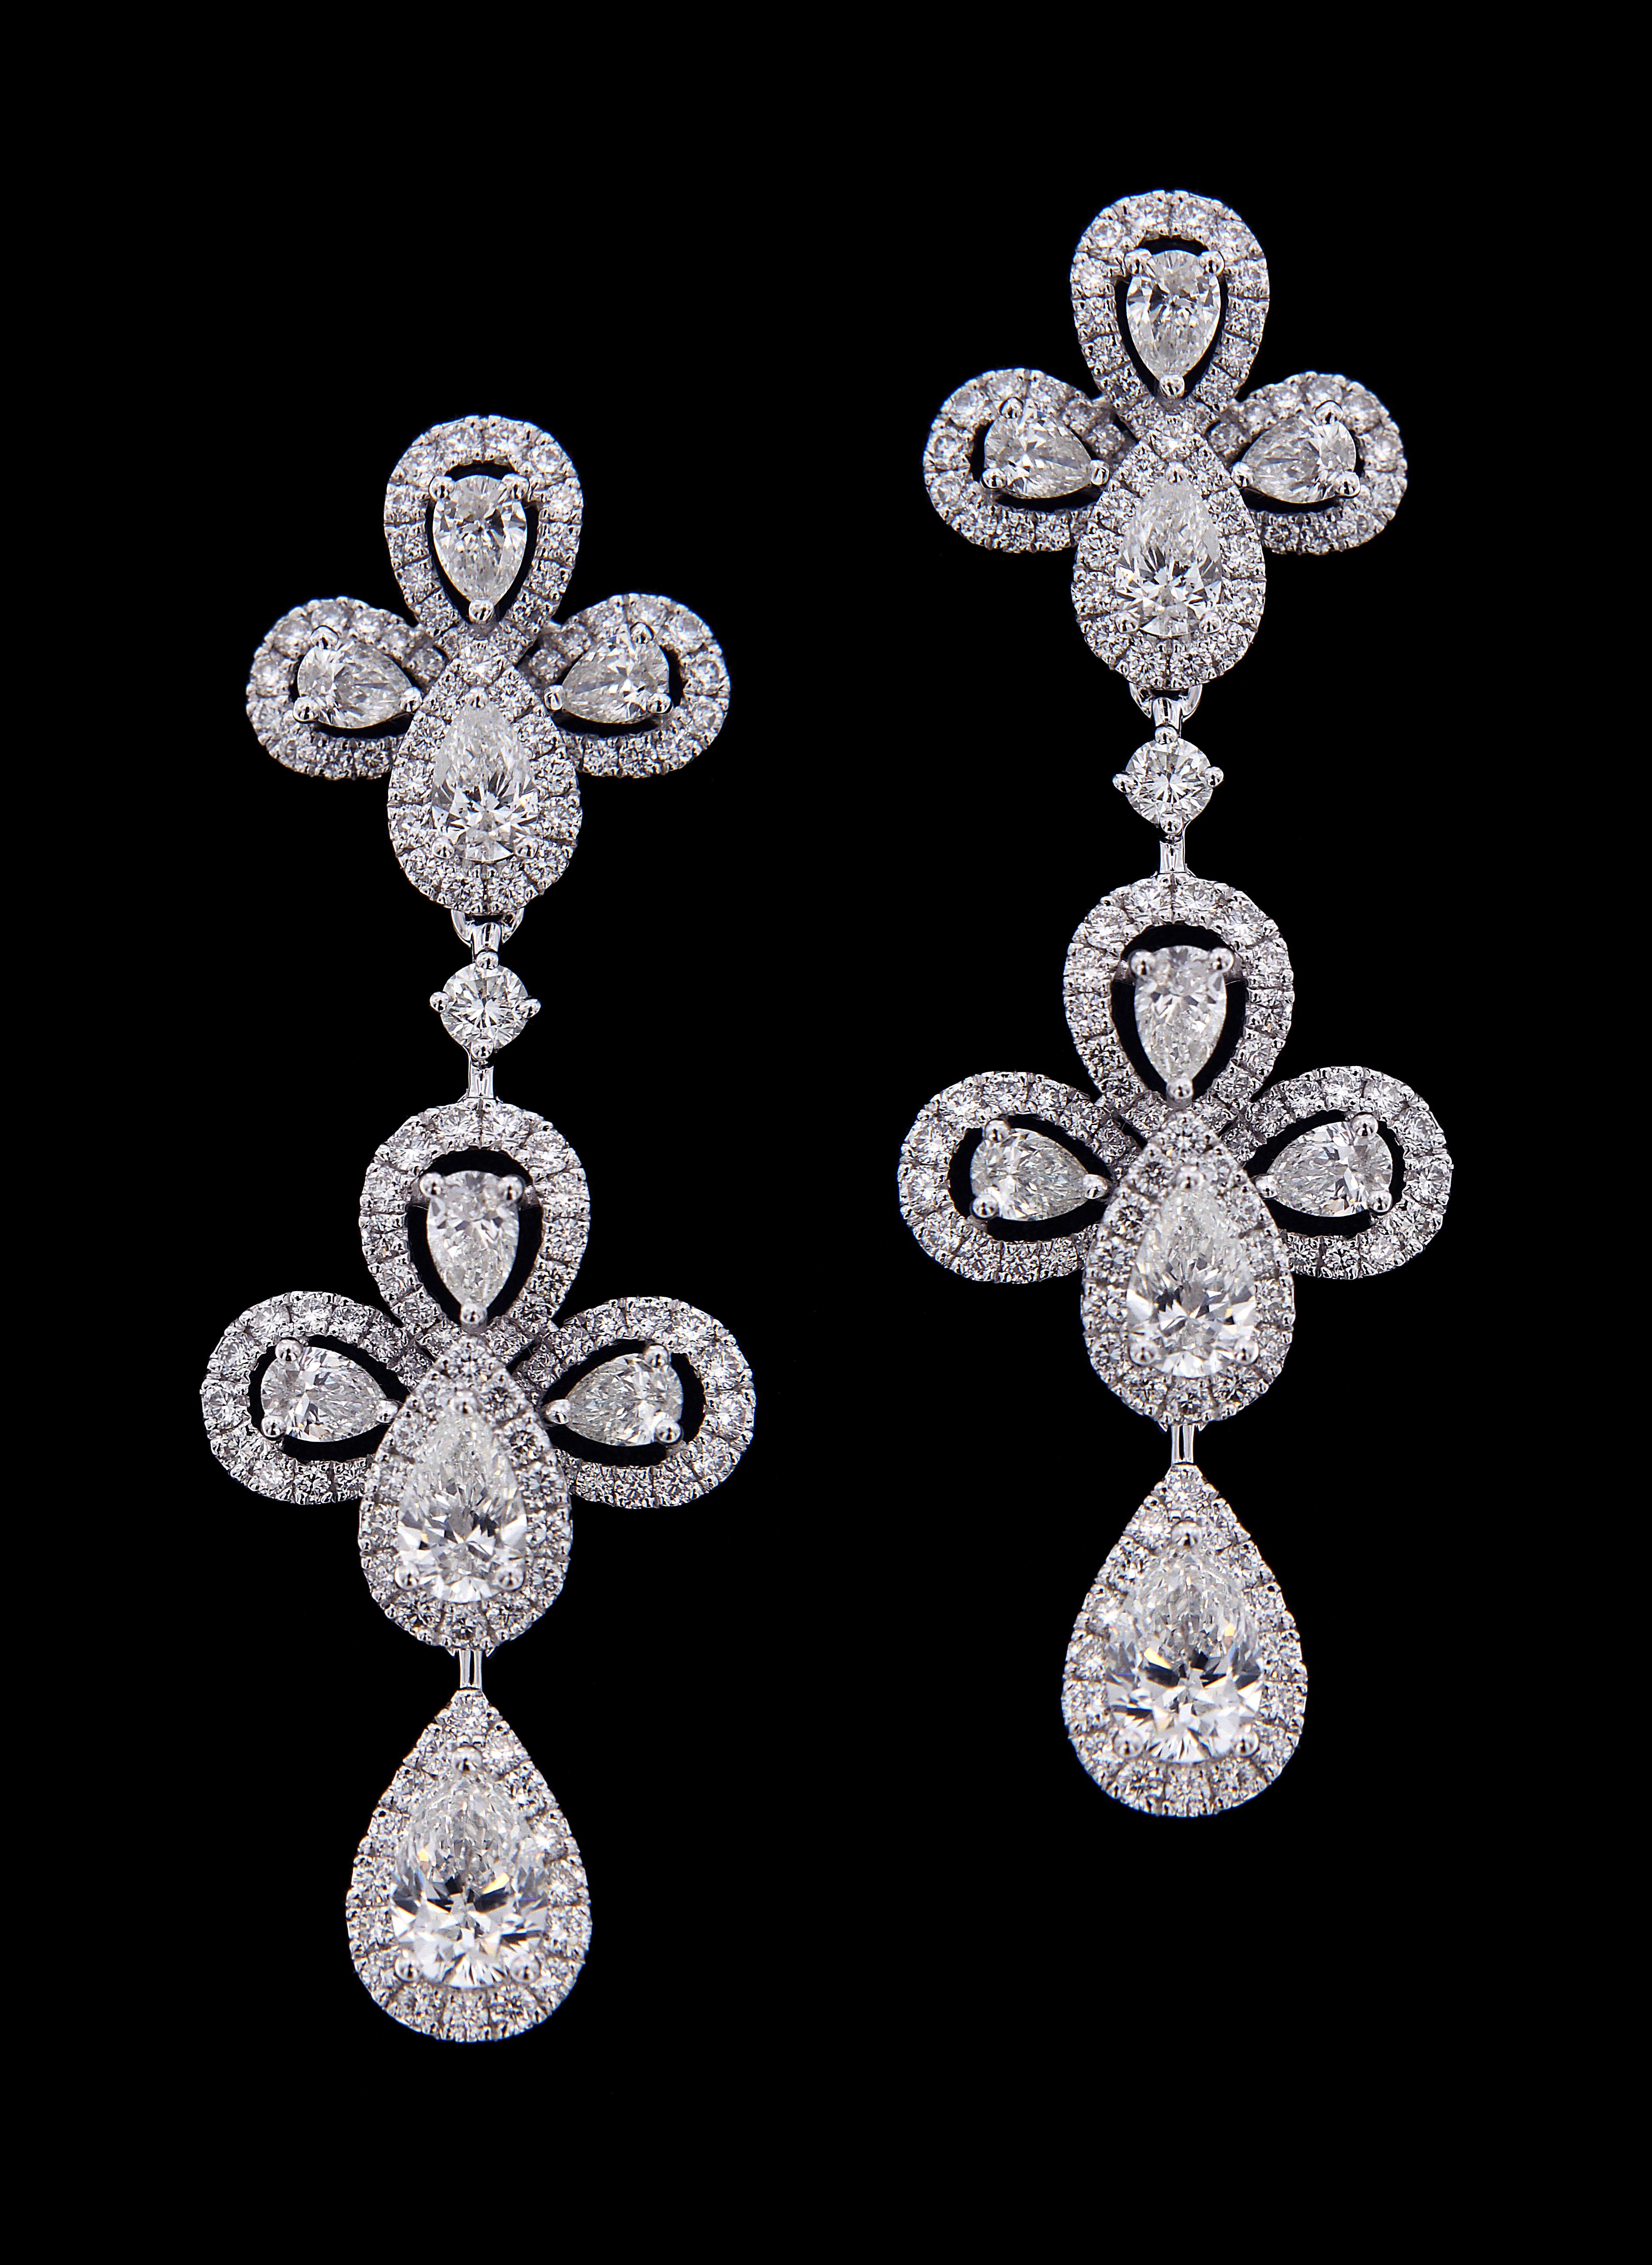 Ritzy 18 Karat White Gold And Diamond Chandelier Set .
Earrings:
Diamonds of approximately 4.634 carats, mounted on 18 karat white gold earring. The earring weighs approximately around 10.583 grams.

Please note: The charges specified do not include